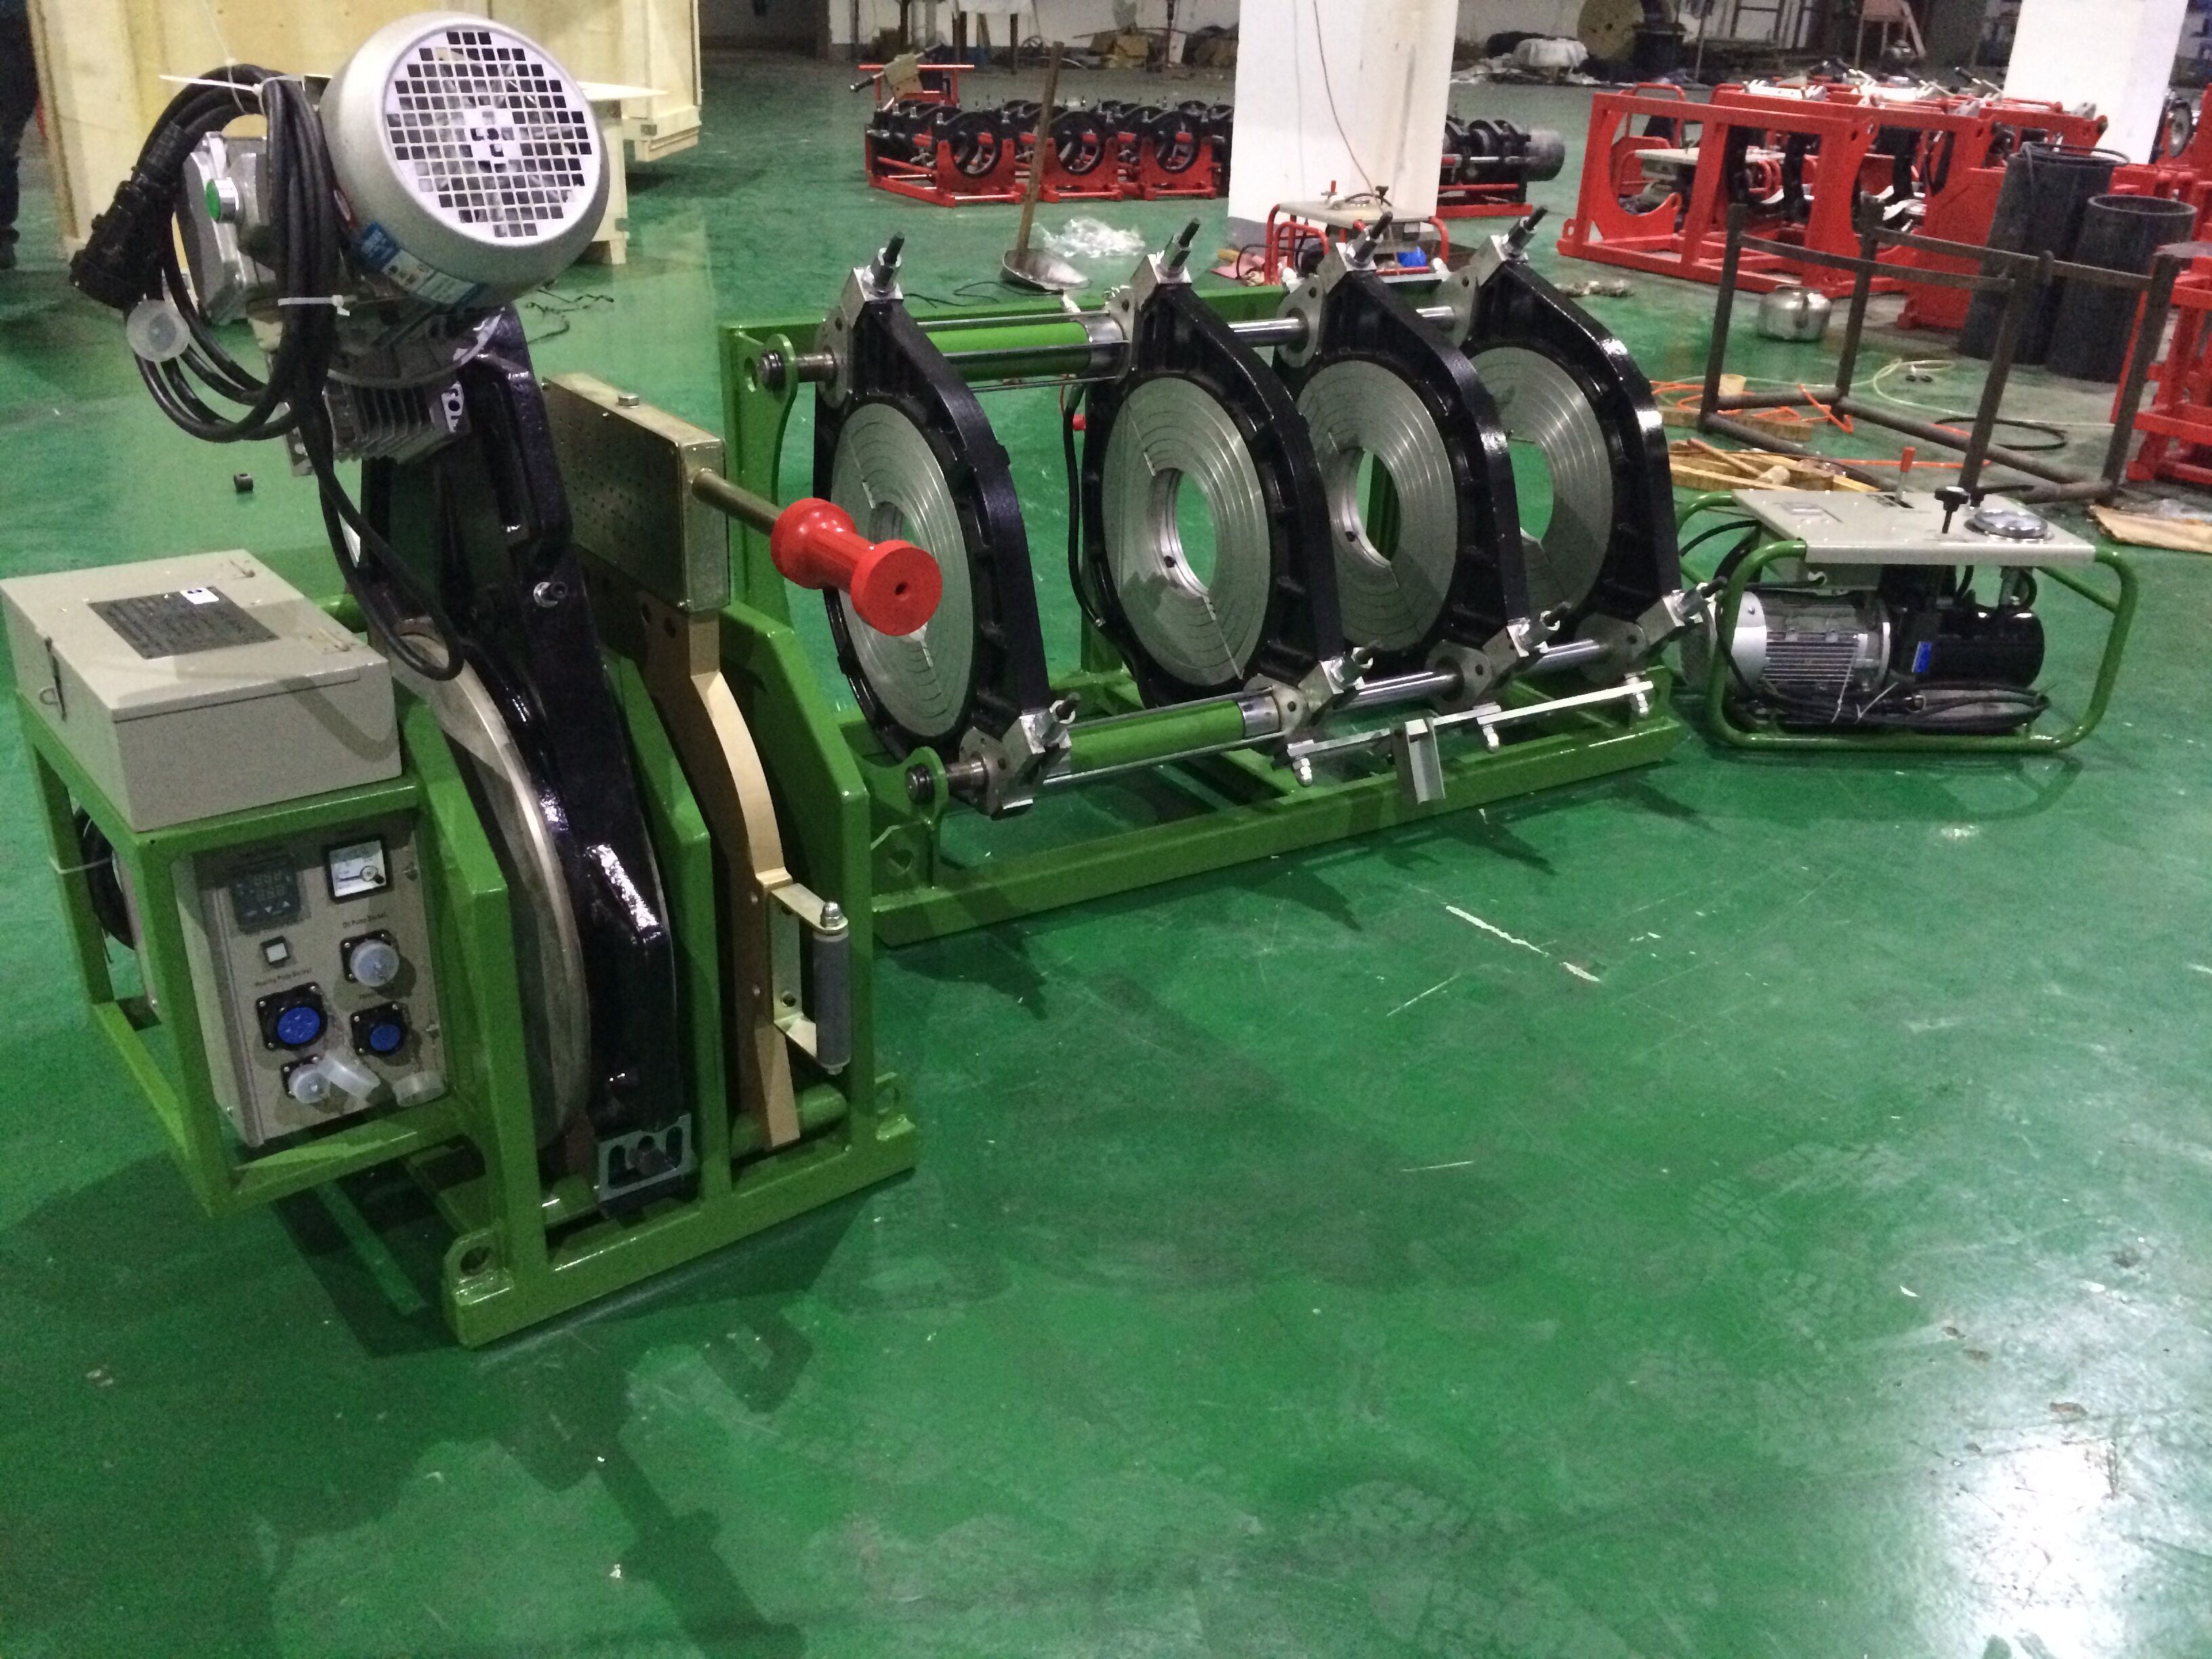 SWT-B450/200H 380V 3 Phase hdpe welding machine manual for 450 HDPE pipes and fittings